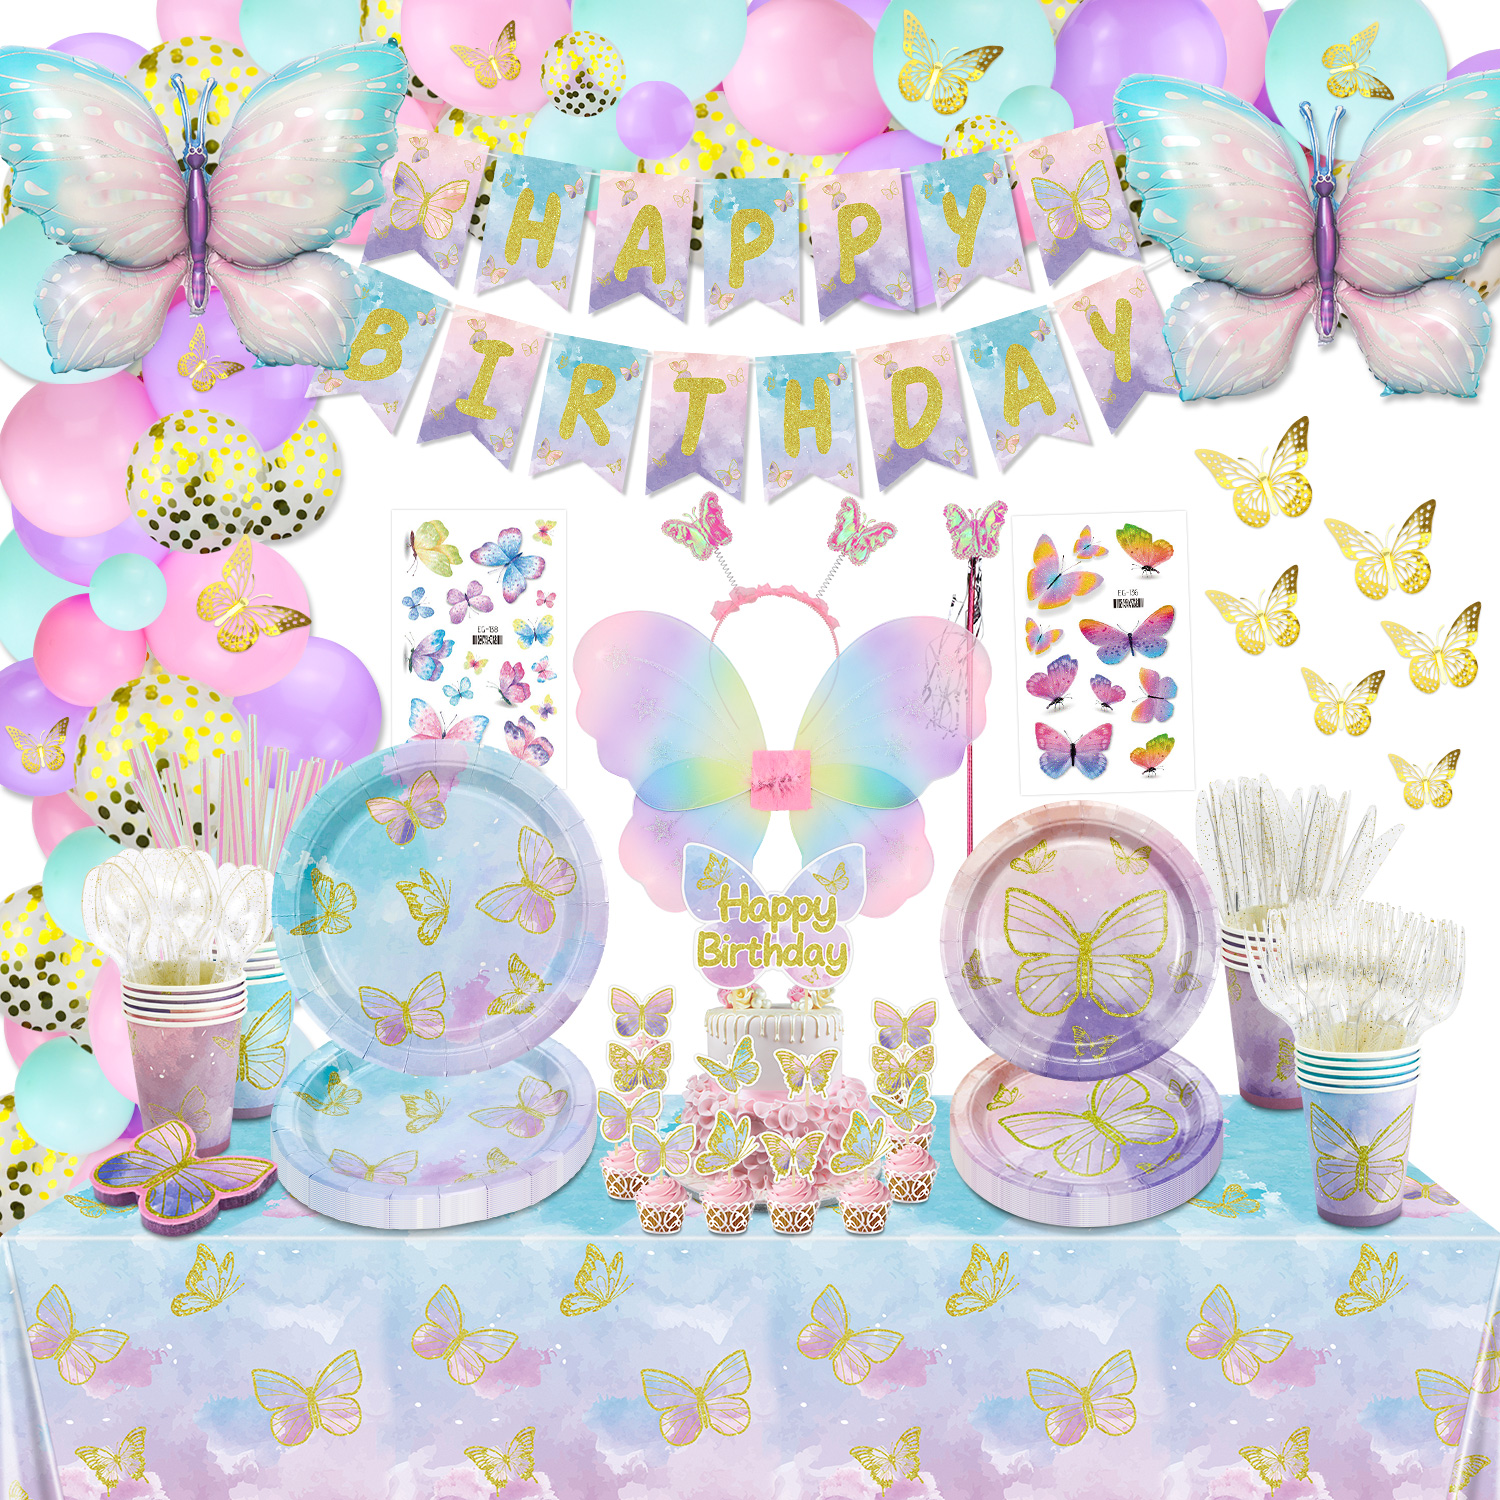 256 Pcs Butterfly Party Decorations - Including Plates, Tablecloth, Balloons, Banner, Butterfly Stickers, Cups, Butterfly Wing Set for Butterfly Birthday Decorations, Fairy Party Supplies - image 1 of 7